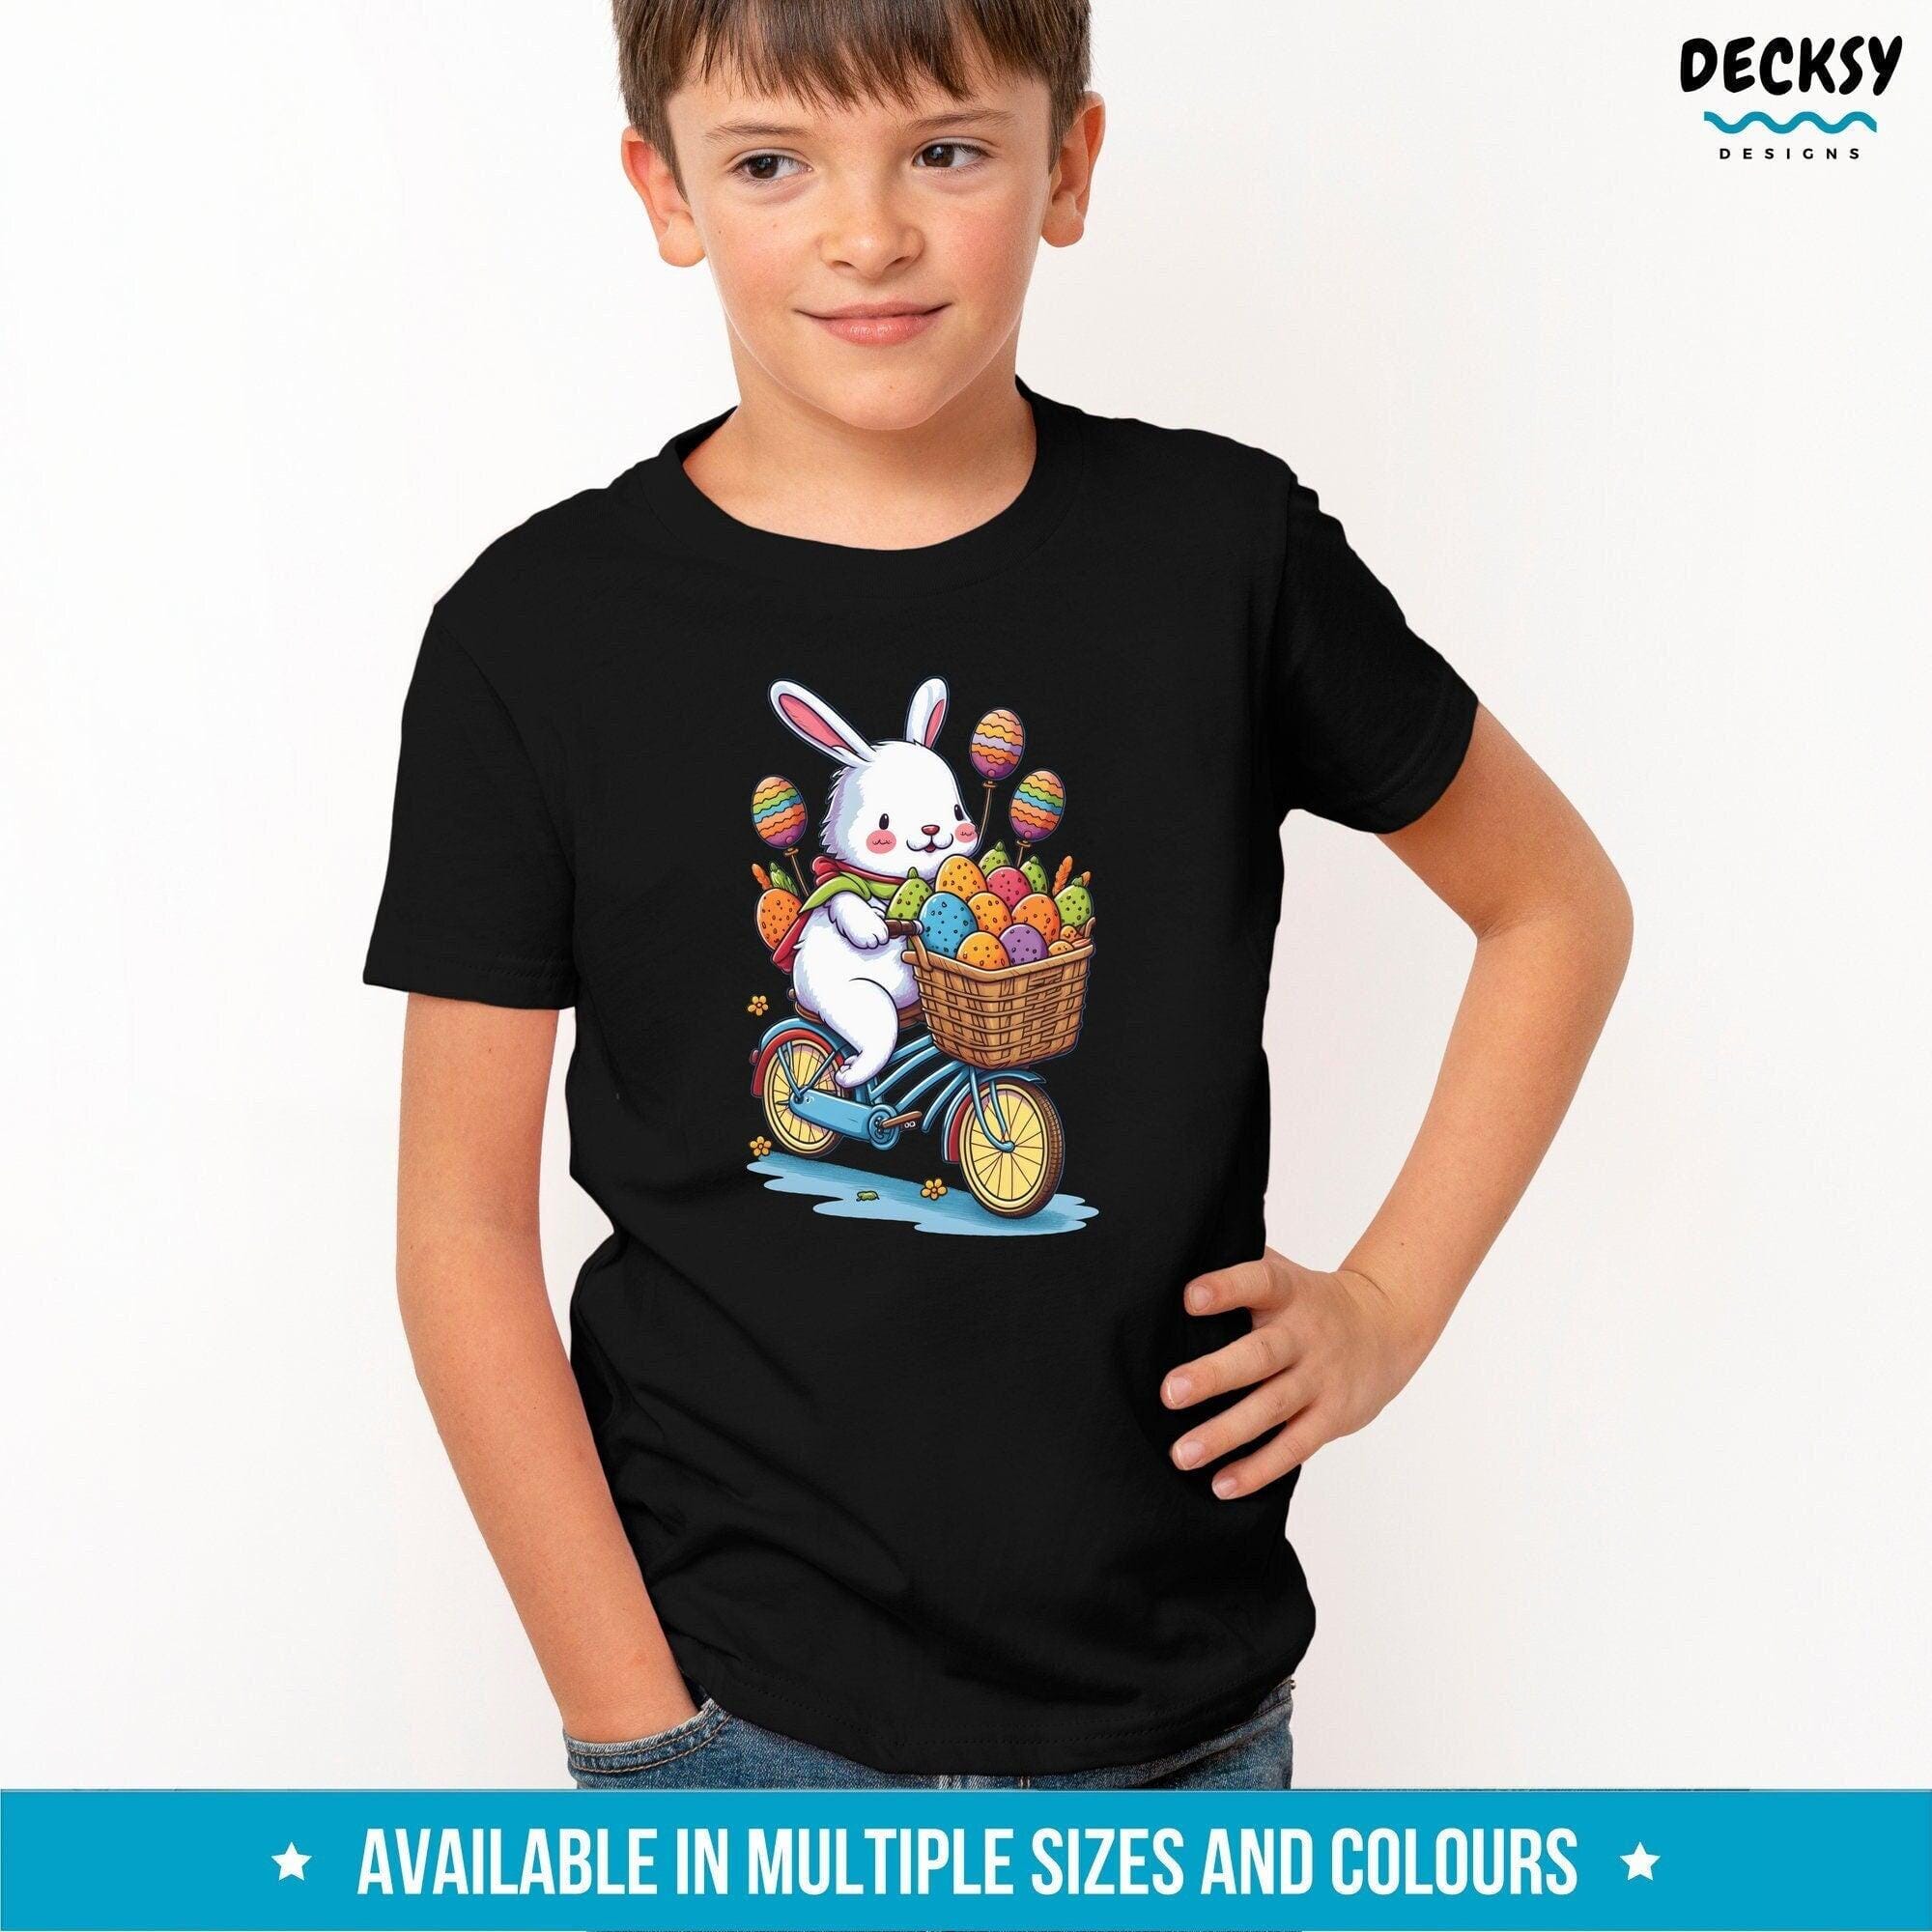 Easter Bunny Shirt Kids , Easter Family Gift-Clothing:Gender-Neutral Adult Clothing:Tops & Tees:T-shirts:Graphic Tees-DecksyDesigns